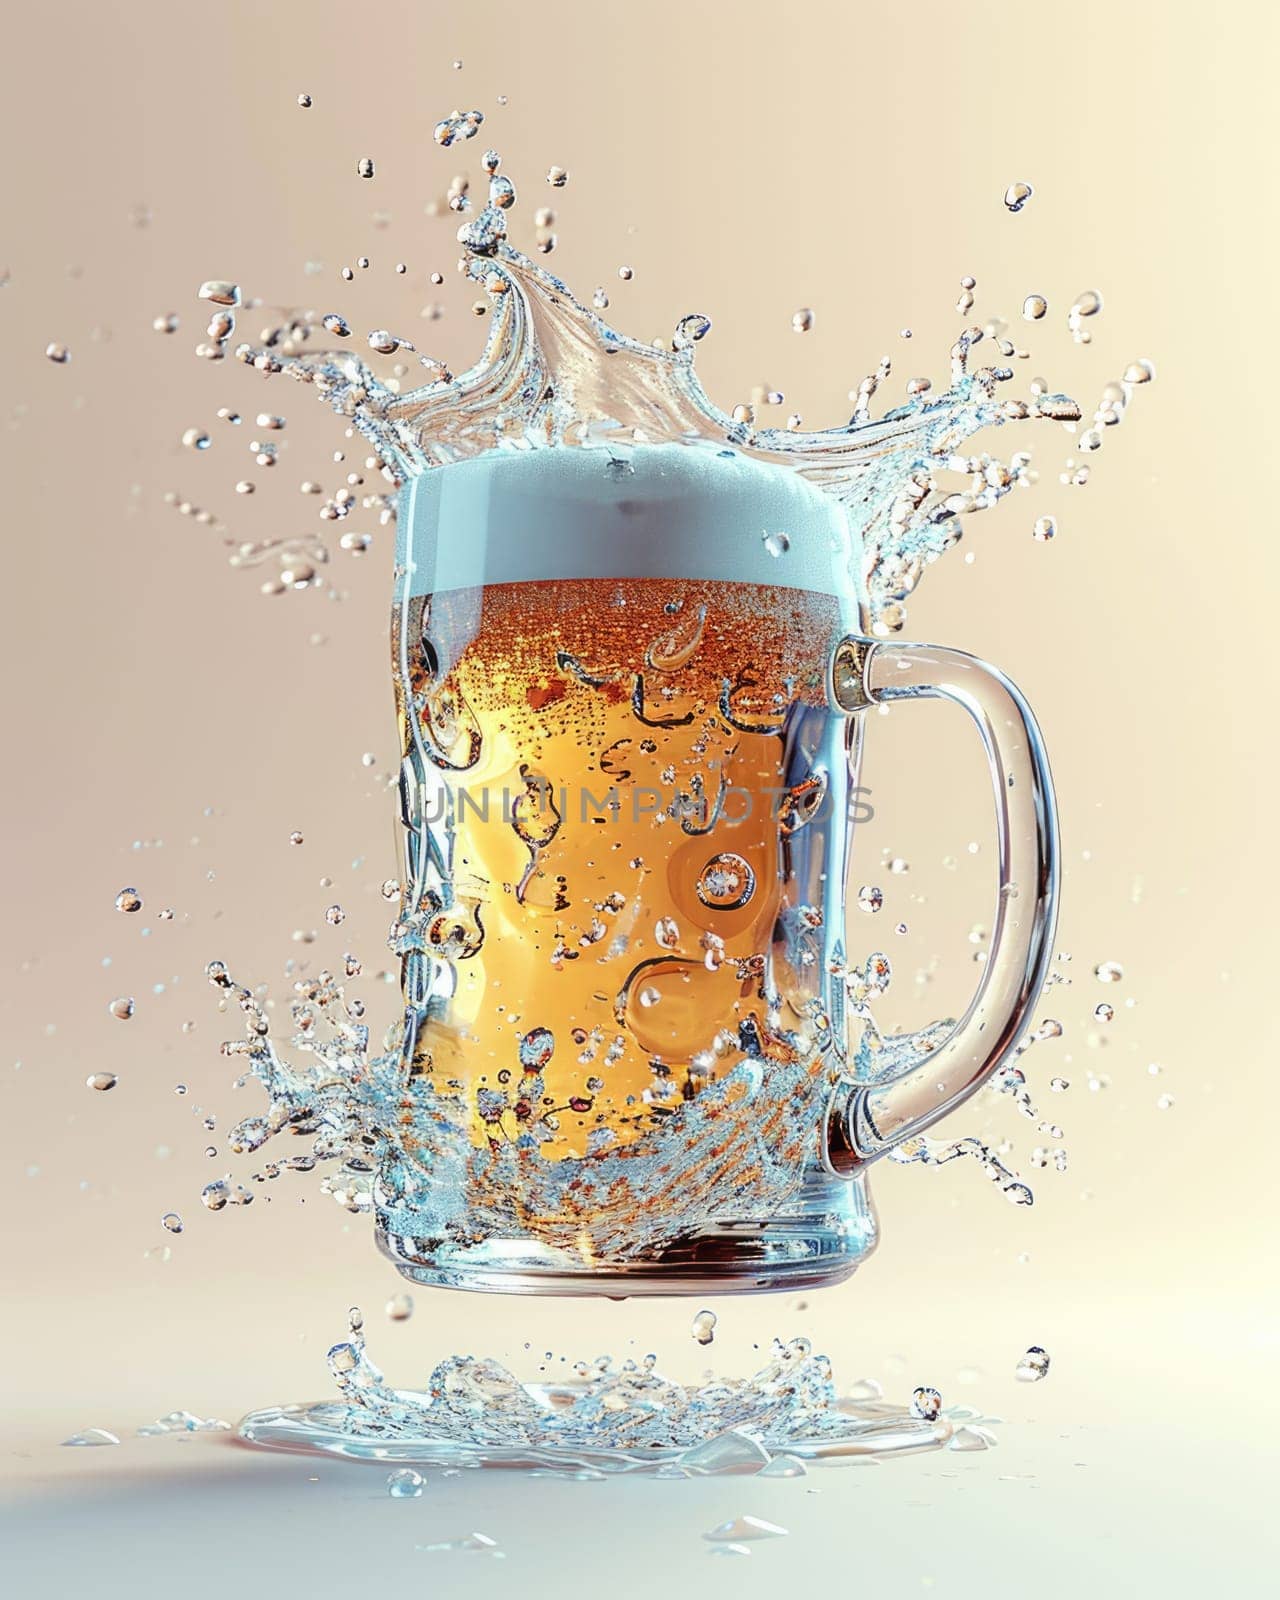 A mug of beer flies in the air with splashes by Yurich32